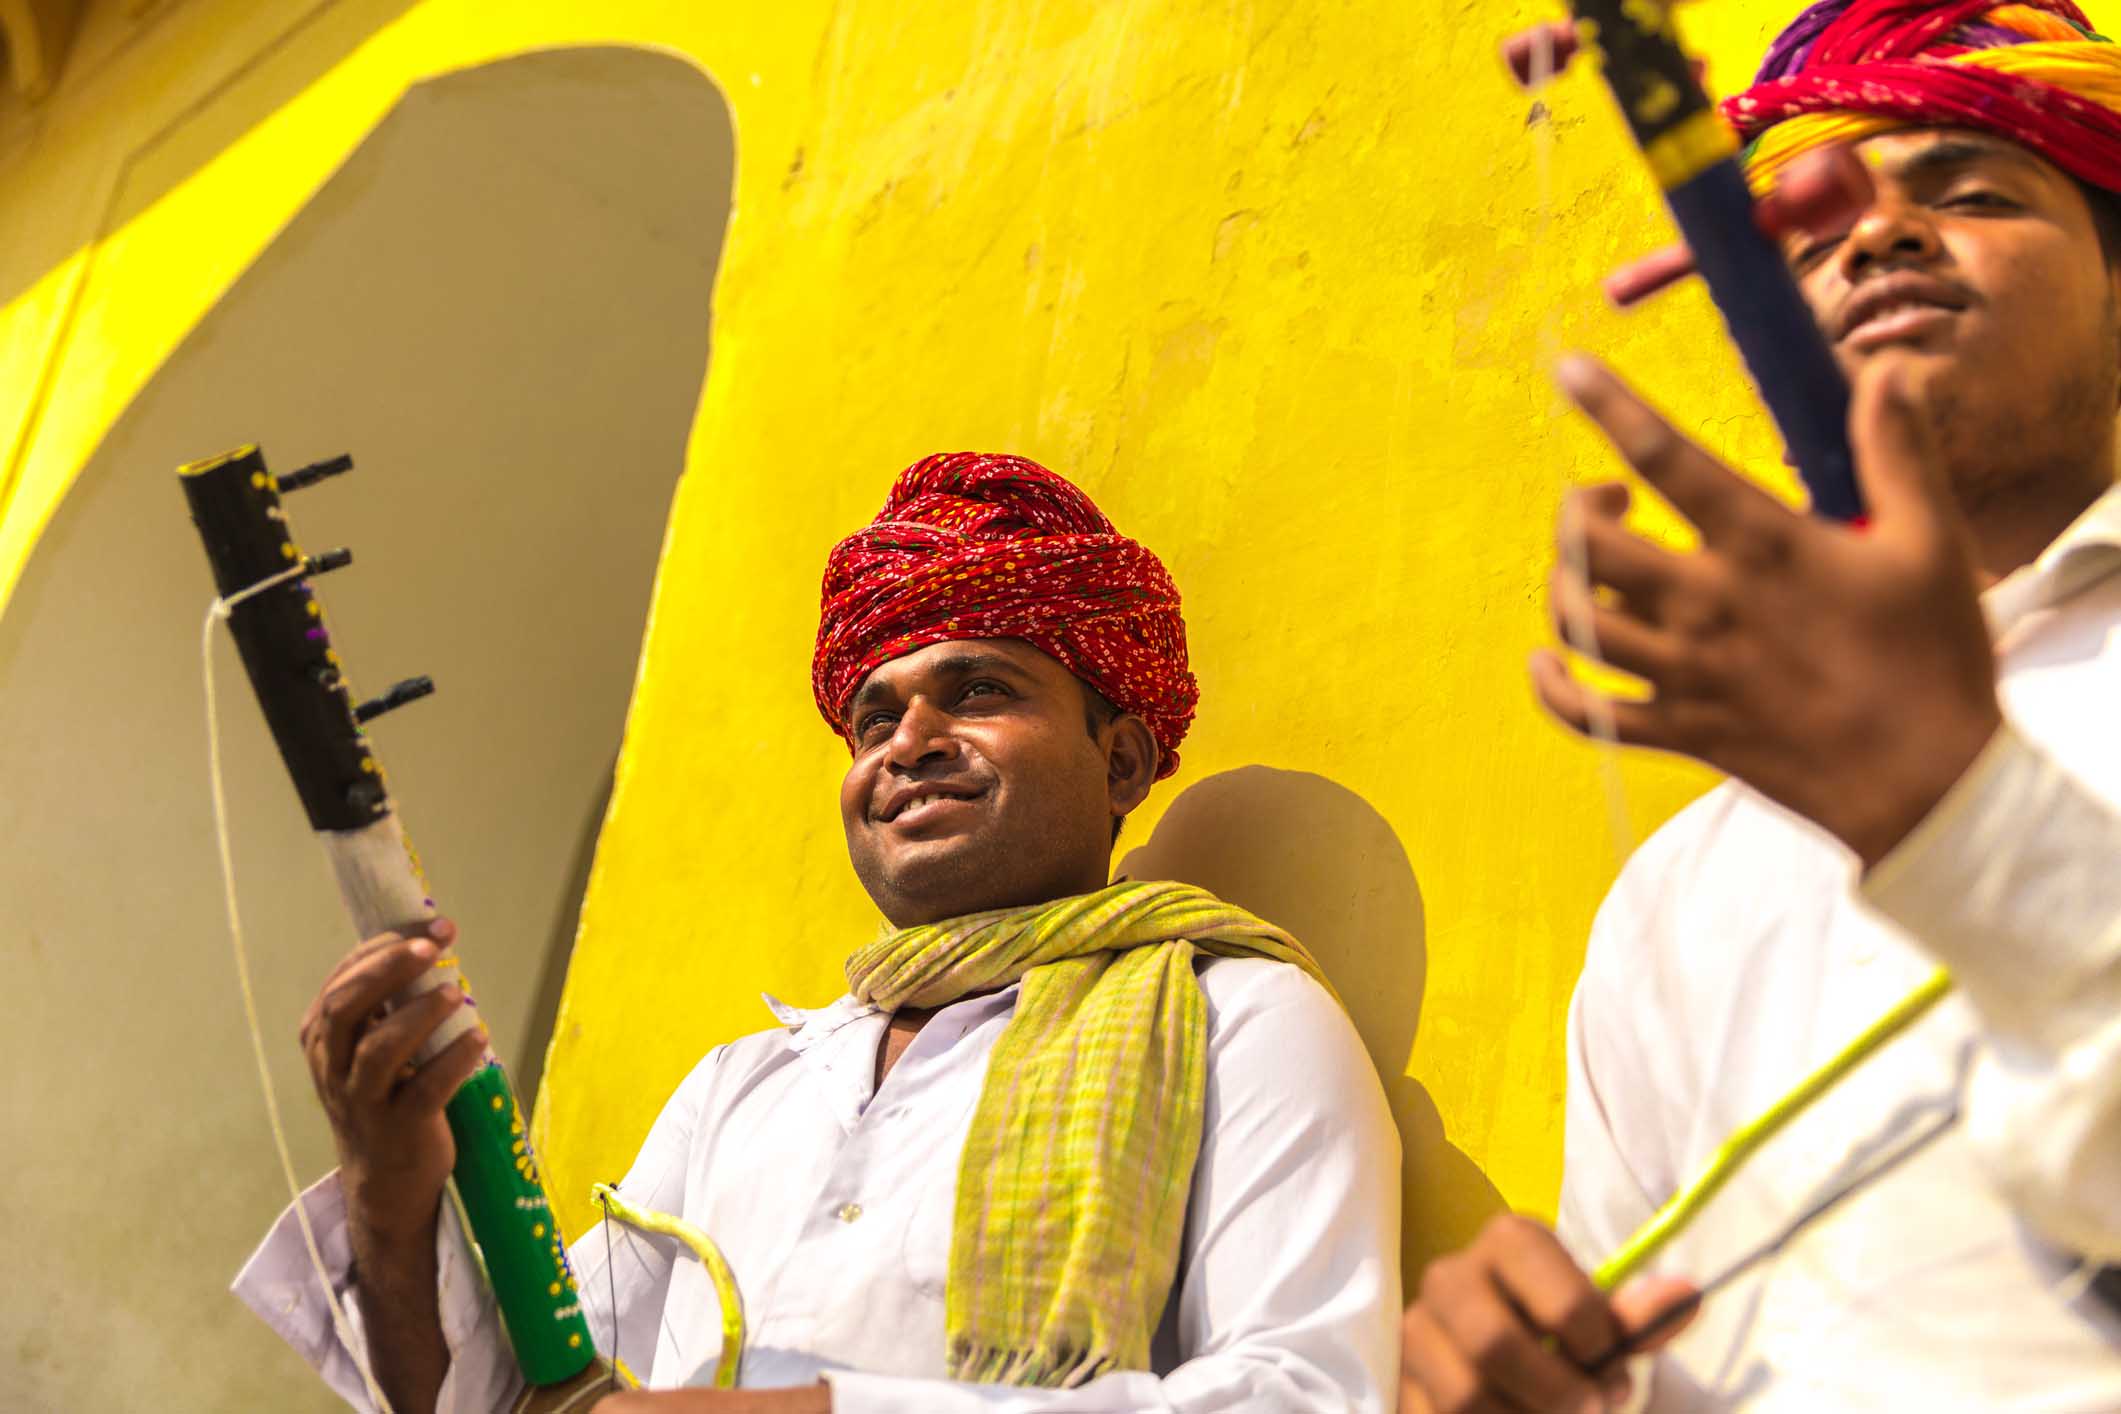 Musicians playing in India